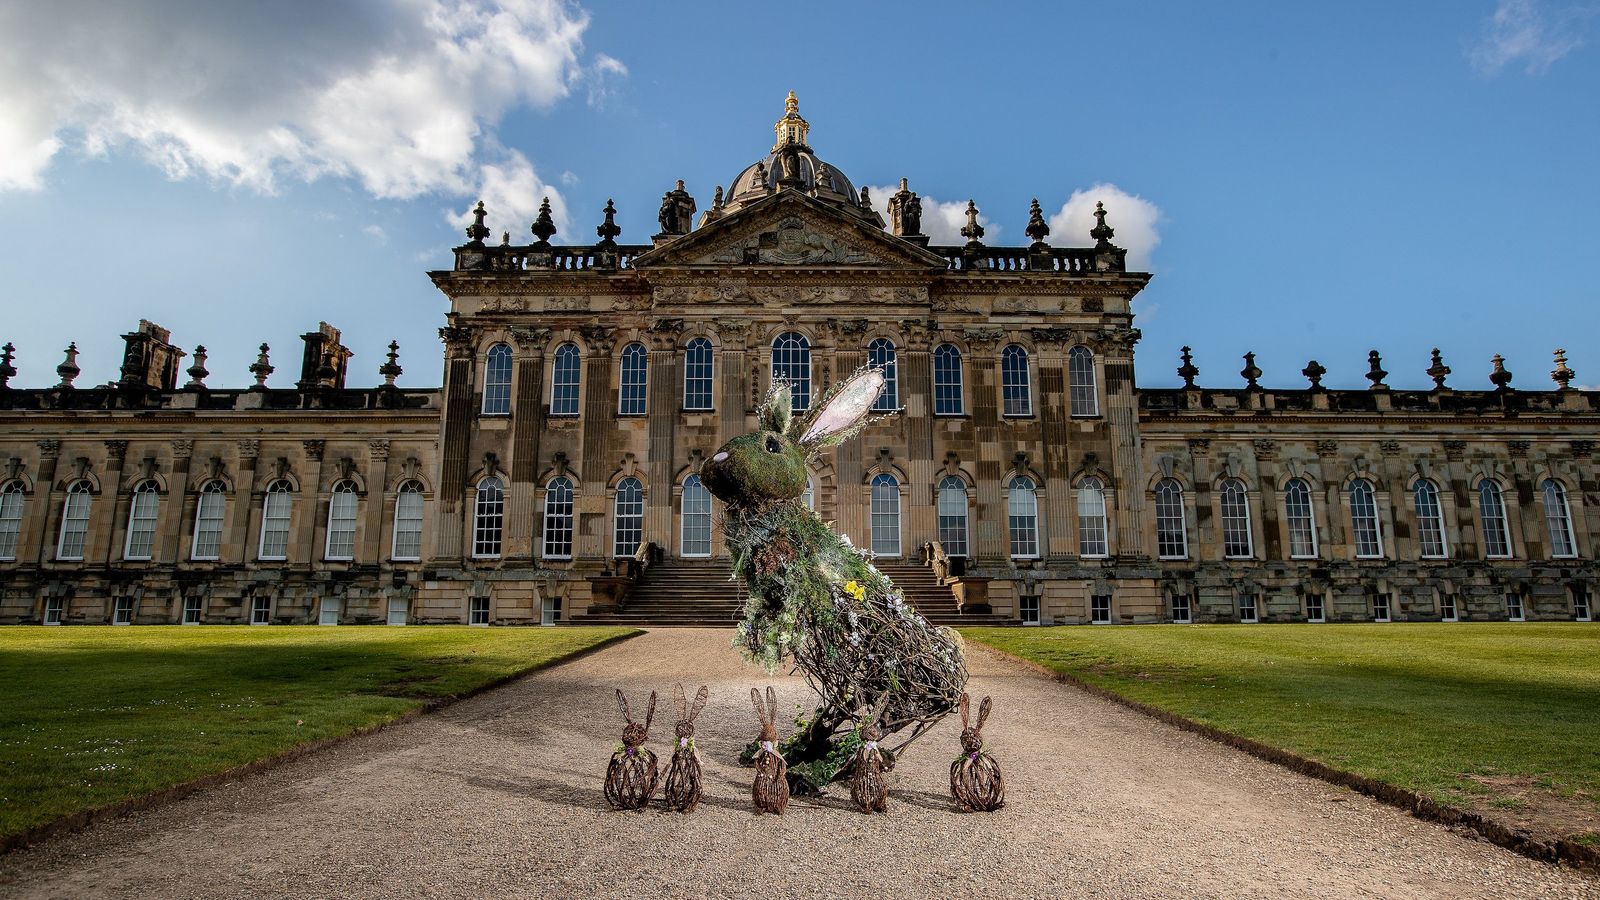 Top events and activities to do this Spring at Castle Howard